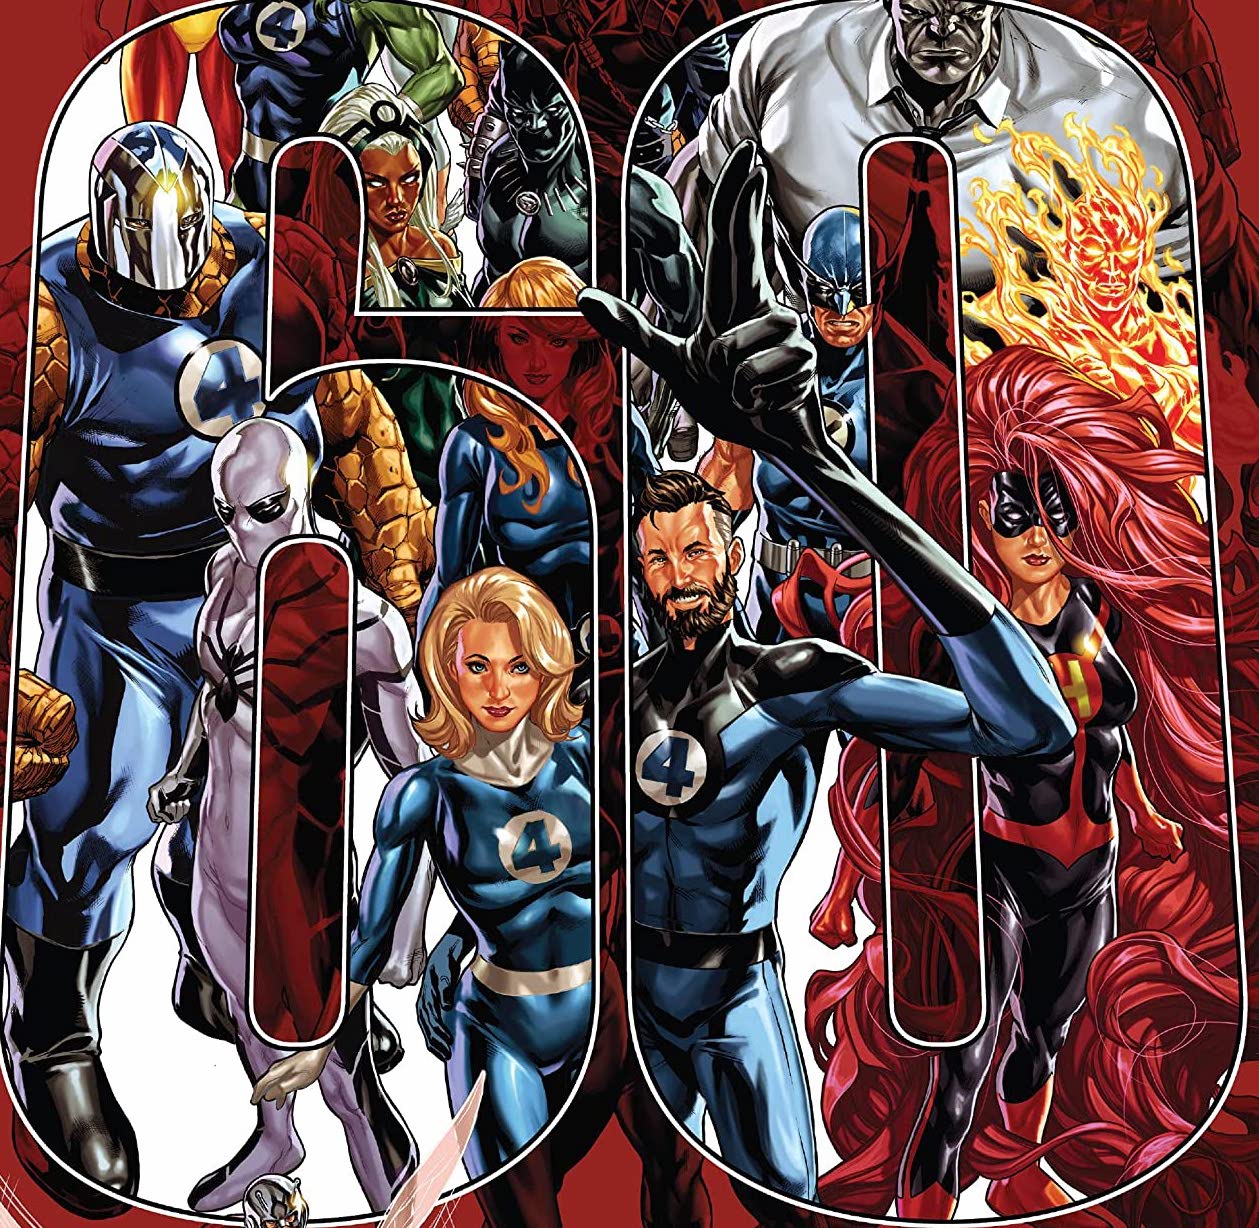 'Fantastic Four' #35 is a celebration for new and old fans alike